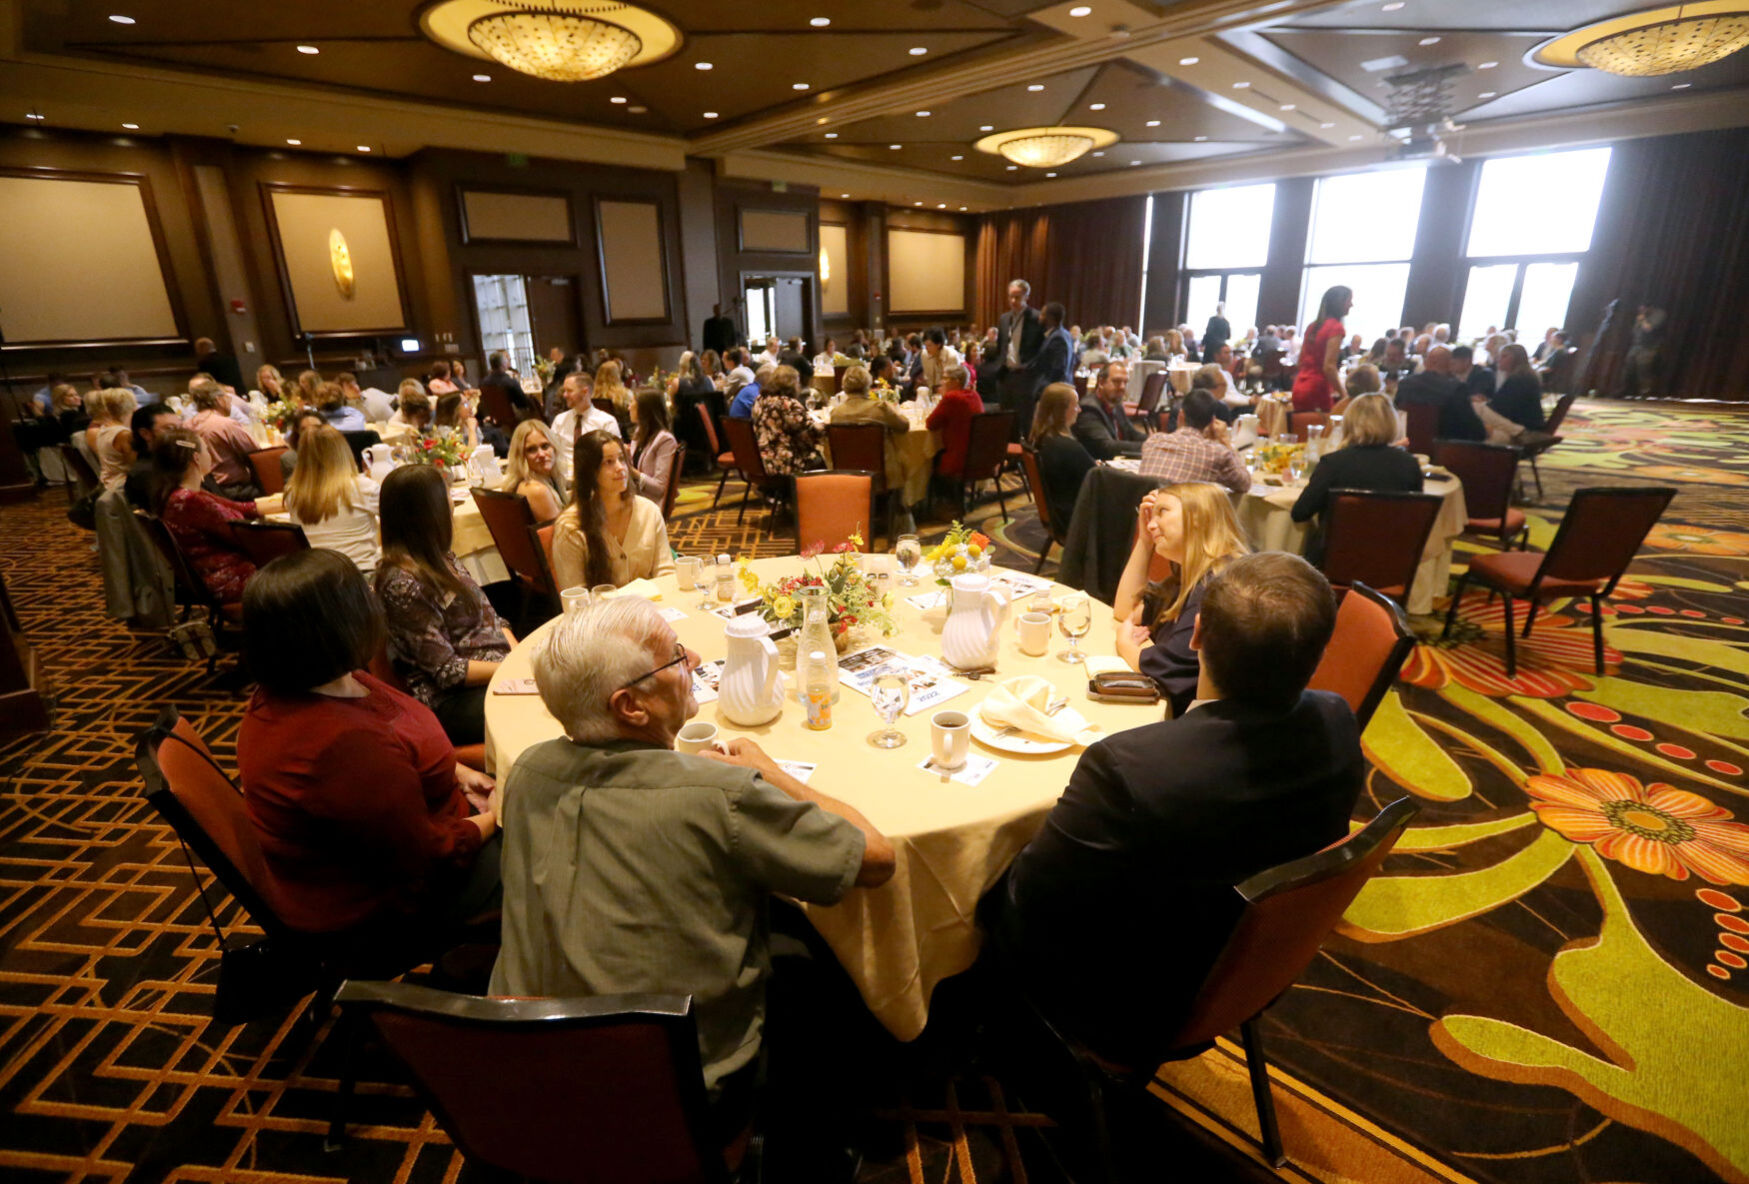 People attend the Rising Stars breakfast at Diamond Jo Casino in Dubuque on Wednesday, Sept. 14. The event, recognizing young professionals for their positive impact and leadership, was presented by bizTimes.biz and sponsored by Dubuque Bank & Trust.    PHOTO CREDIT: JESSICA REILLY